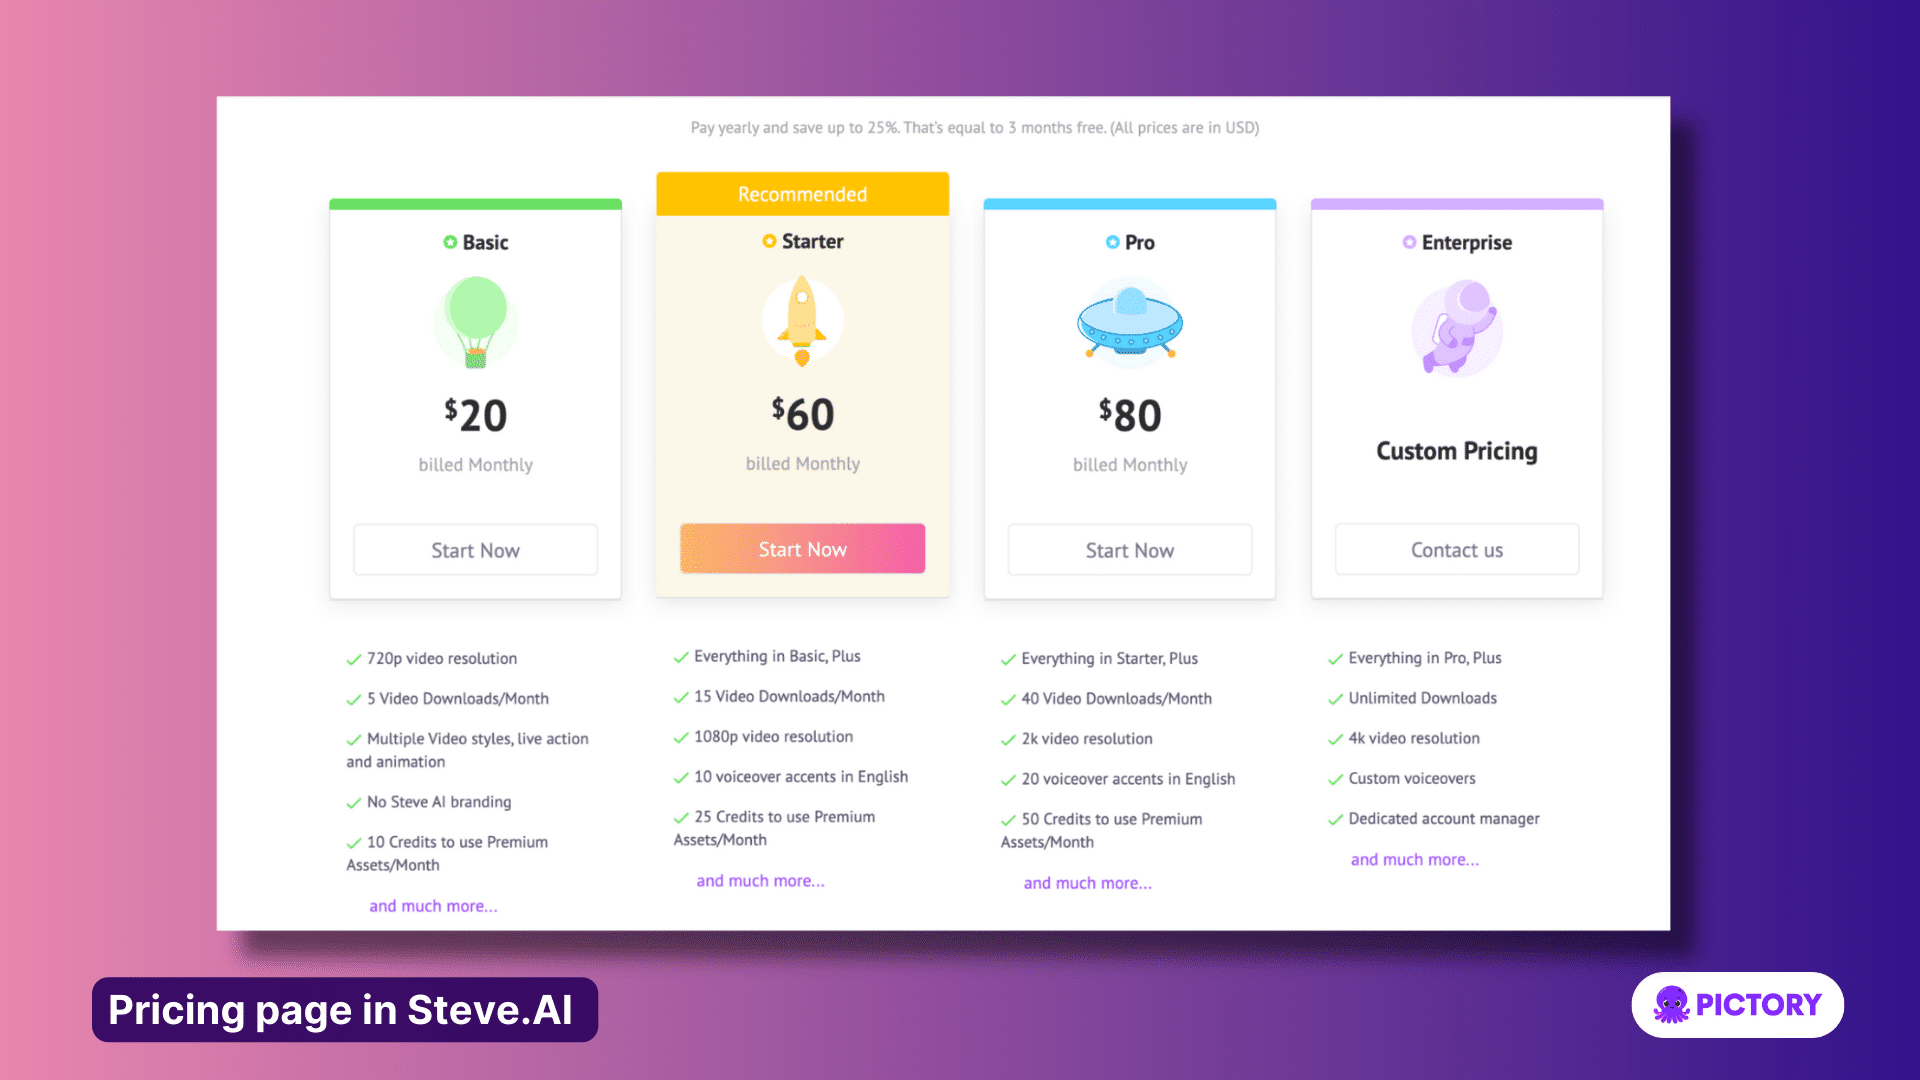 Pricing page in Steve.AI